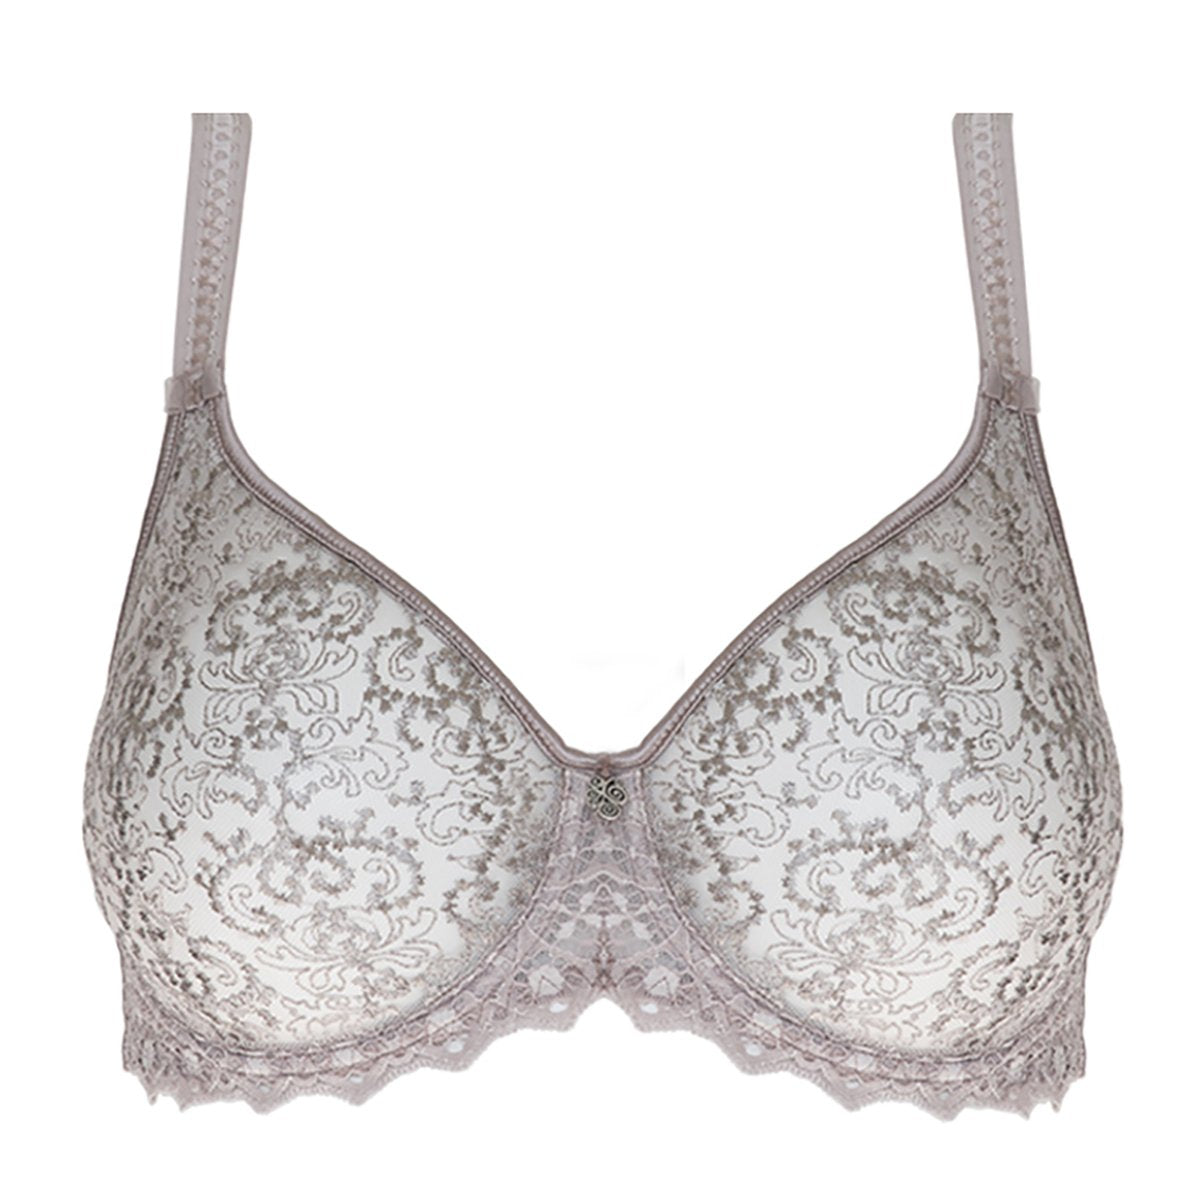 Comfortable nude invisible lace underwire full cup bra, VERITY